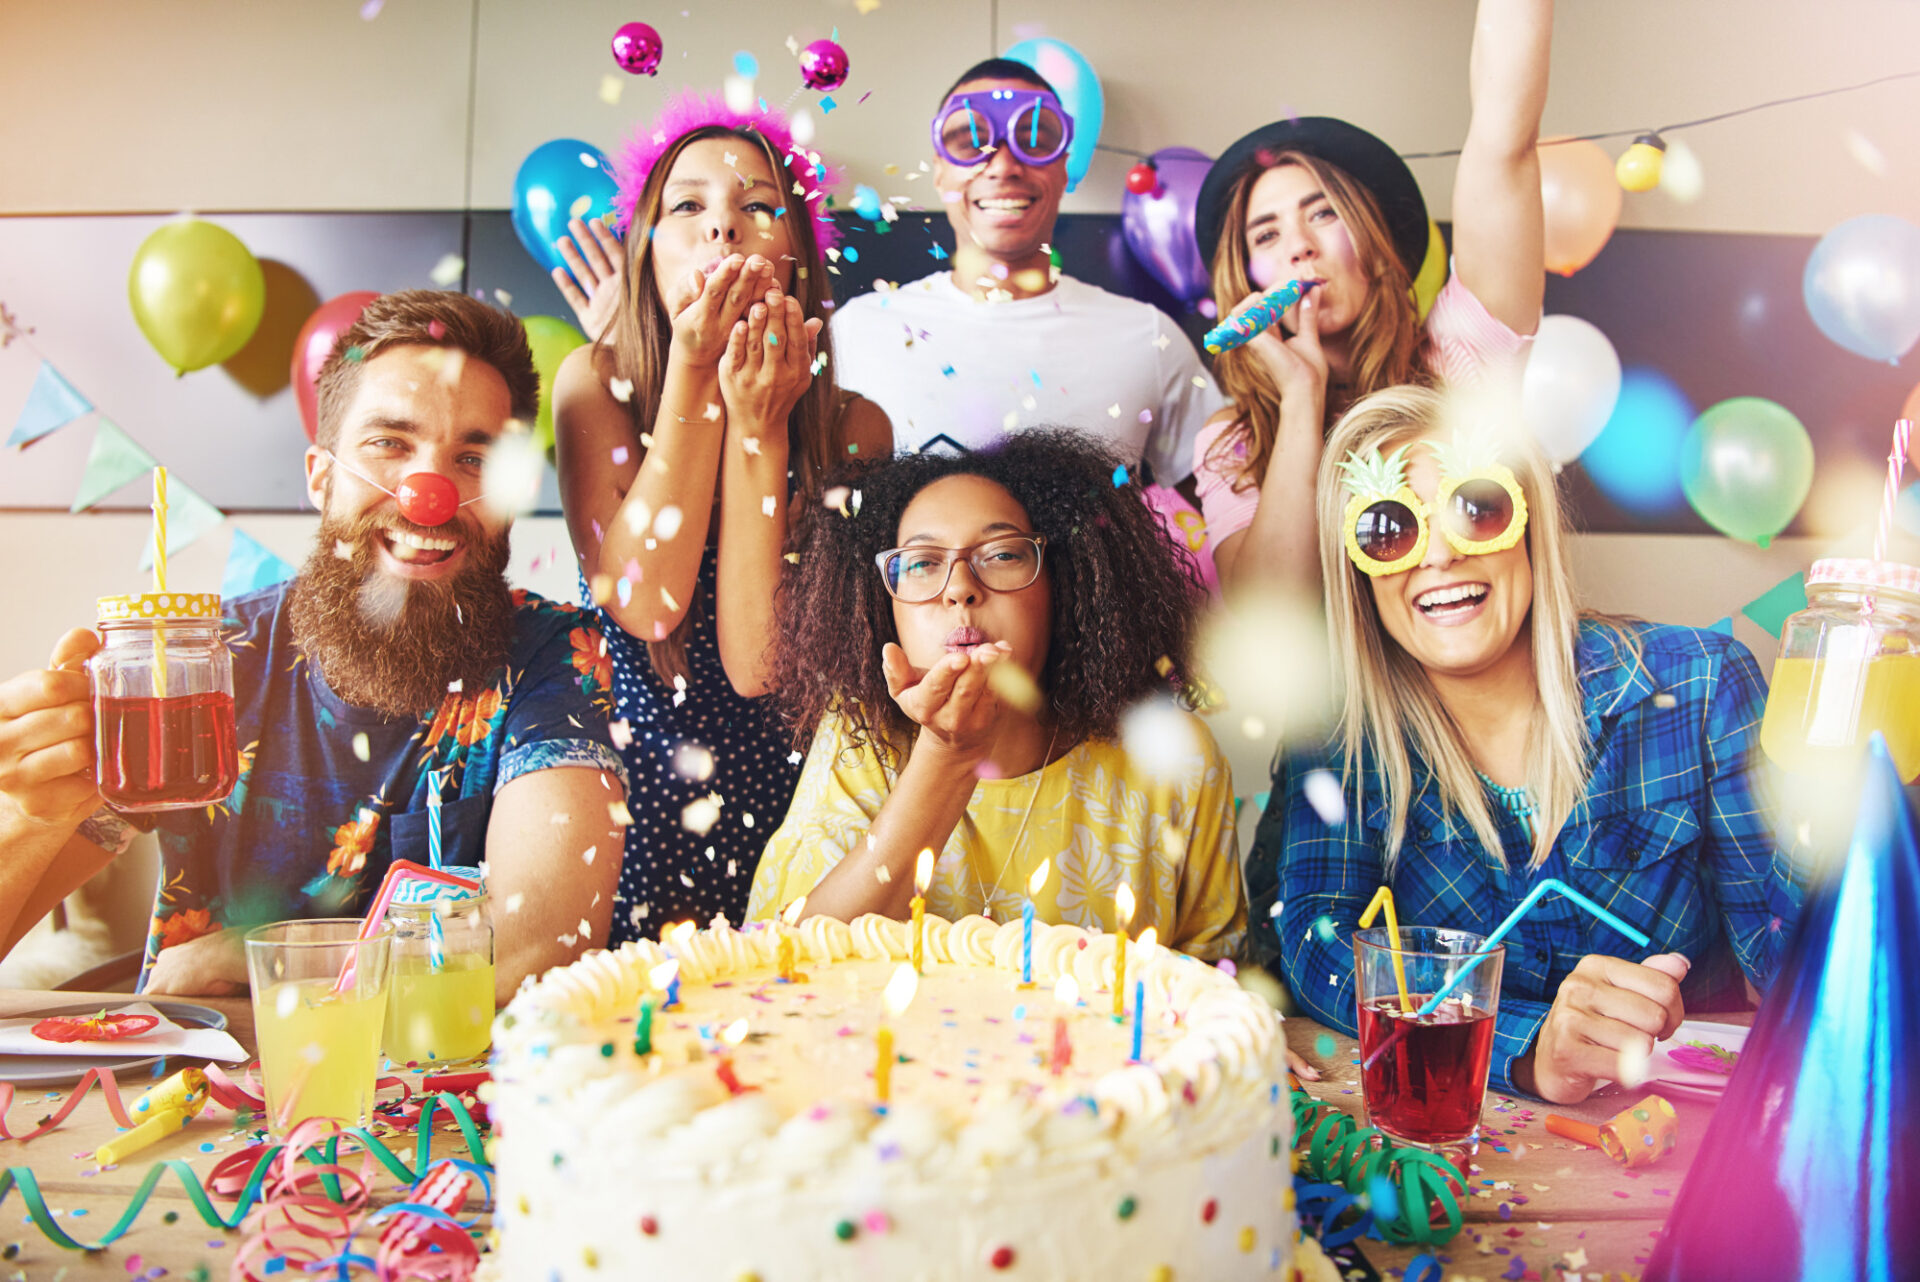 Ten Reasons Why You Should Host Your Kid’s Next Birthday Party at the Bowling Alley